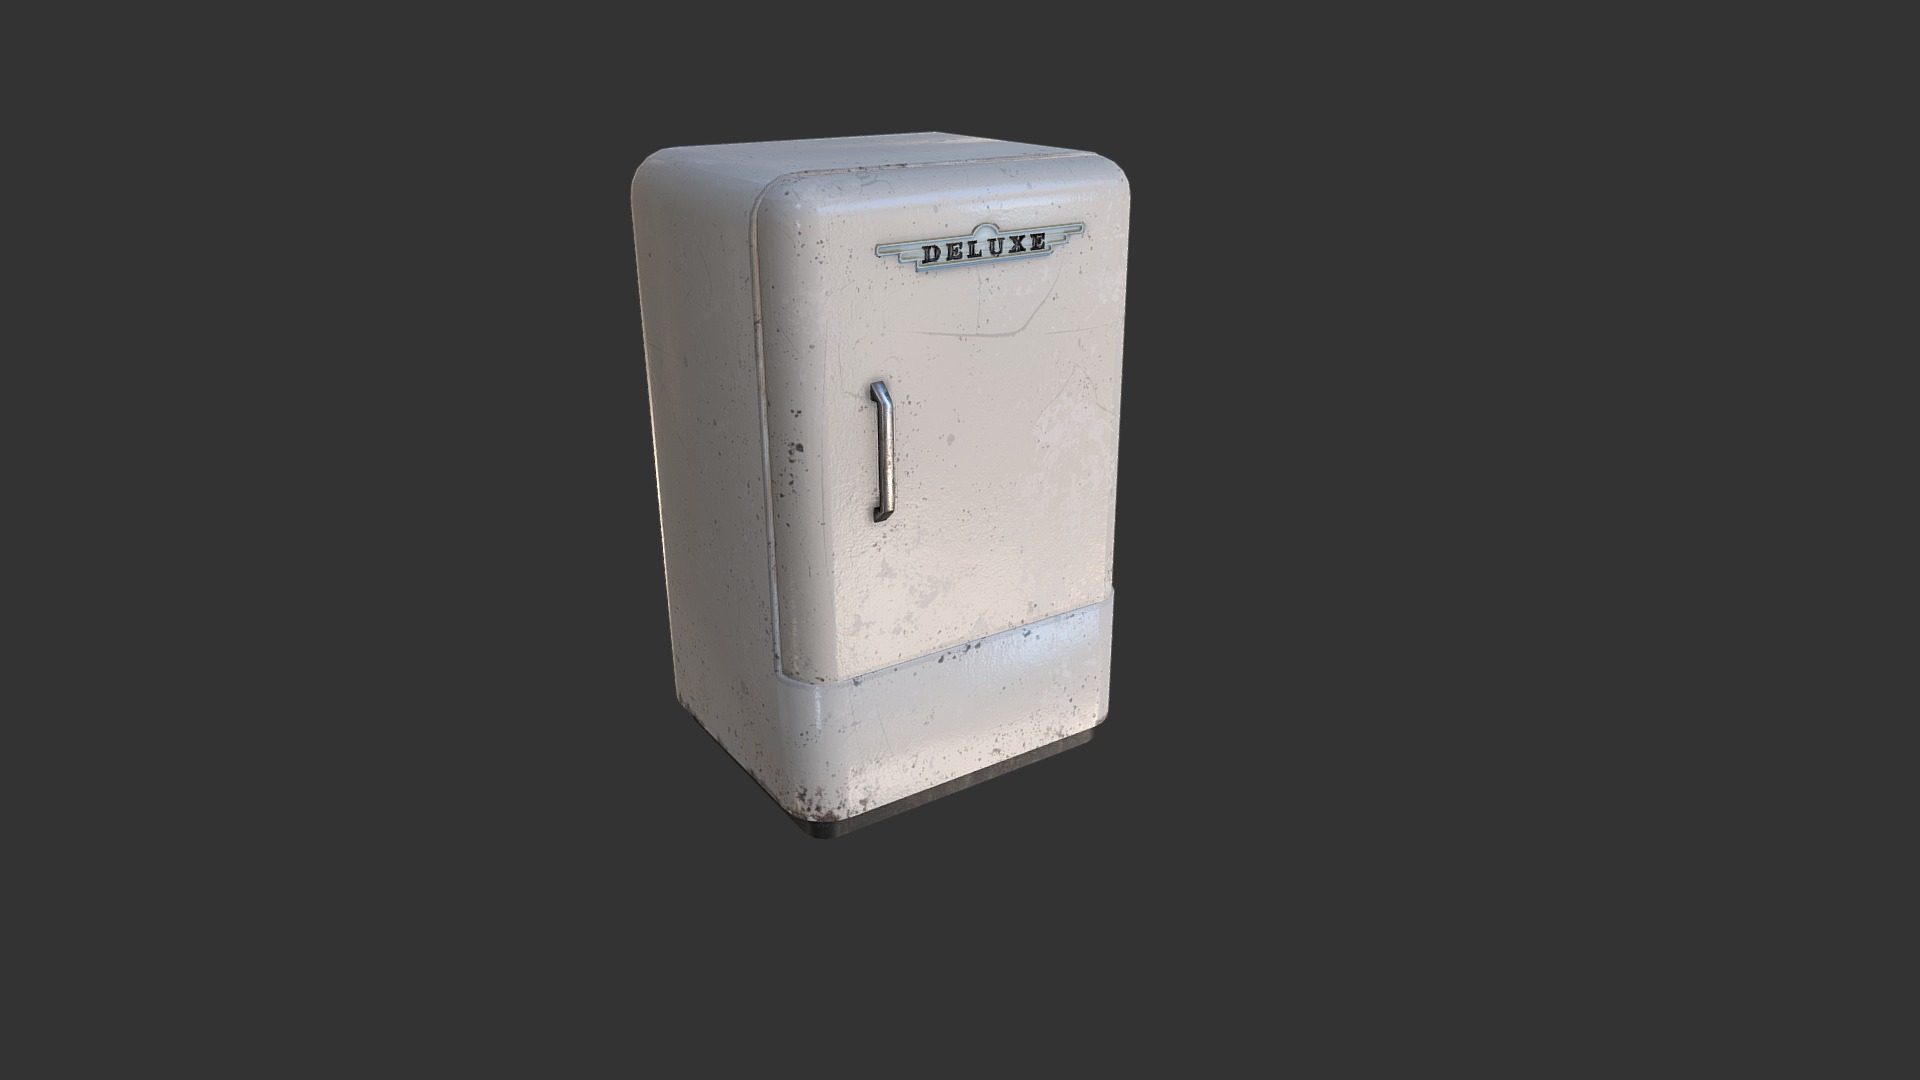 3D model Old Fridge pbr - This is a 3D model of the Old Fridge pbr. The 3D model is about a white rectangular object.